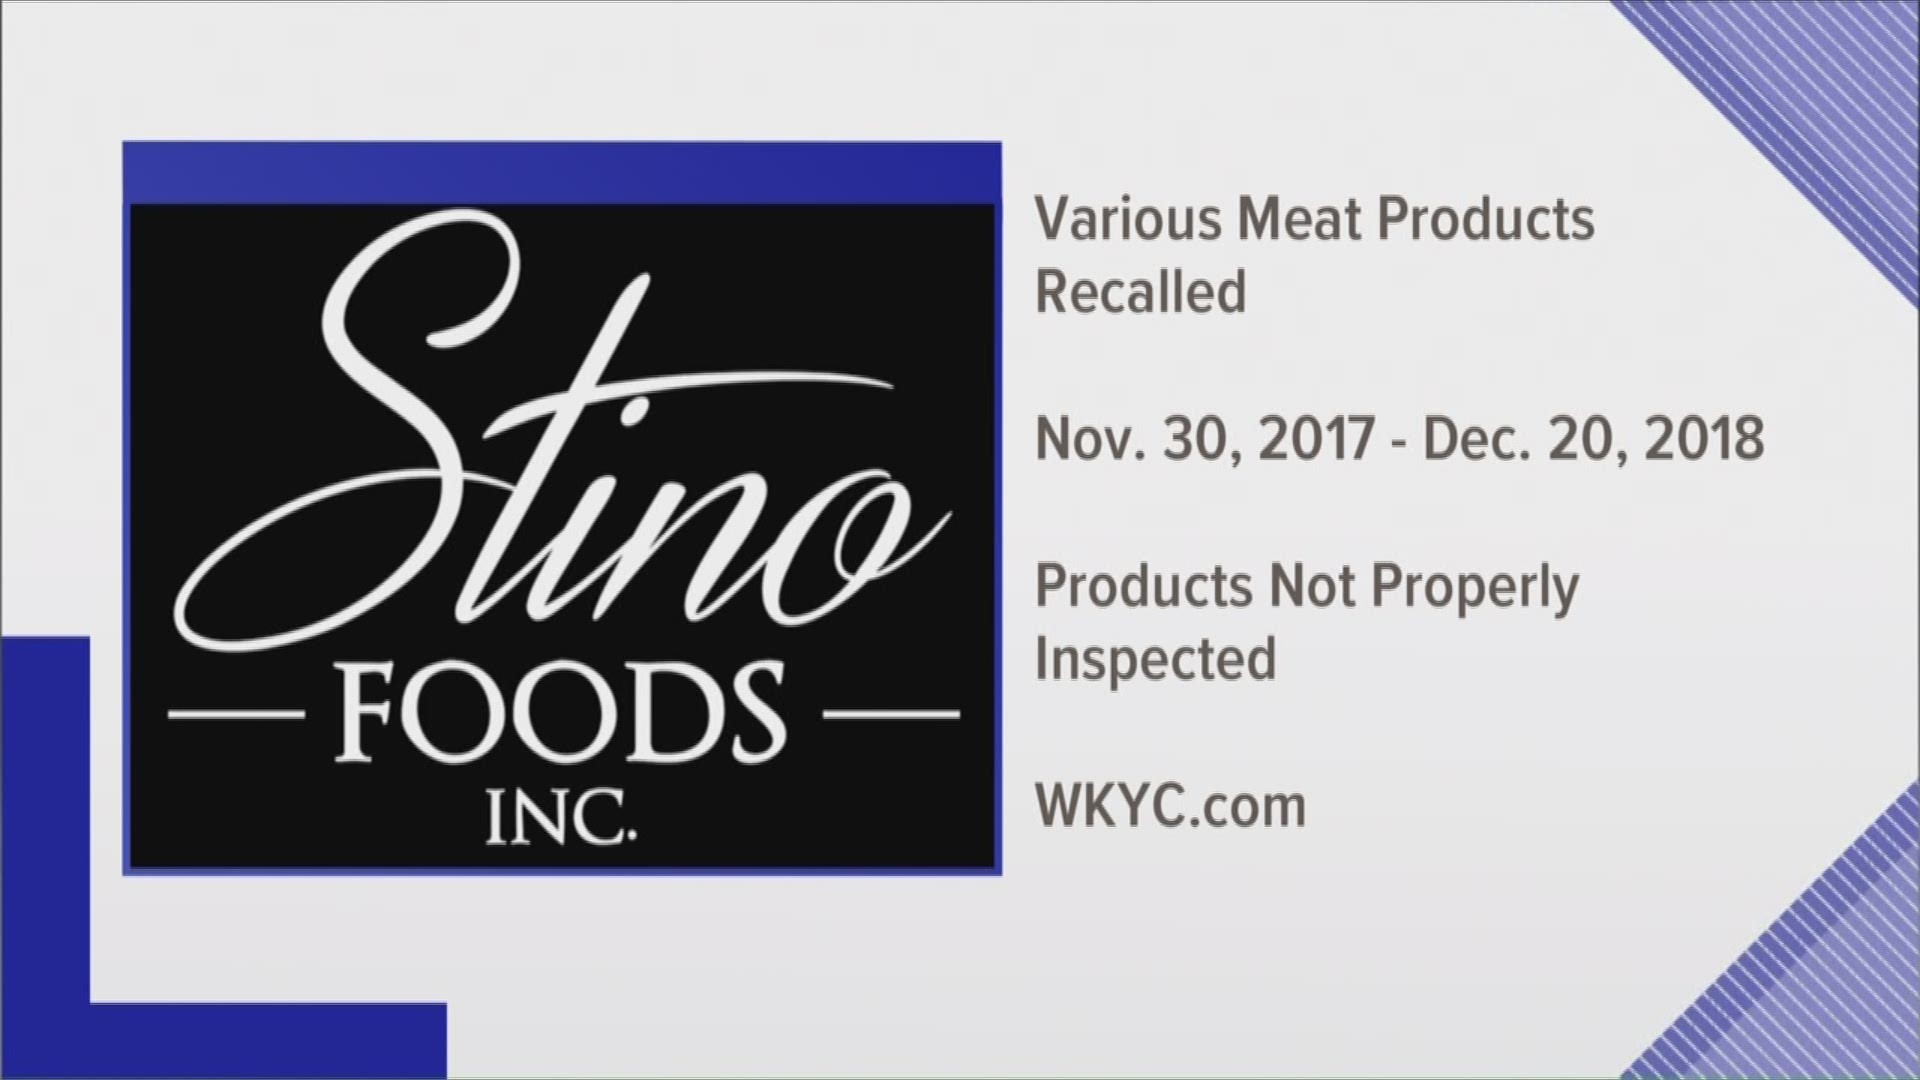 USDA recalls more than 11,000 pounds of Stino da Napoli products due to lack of inspection